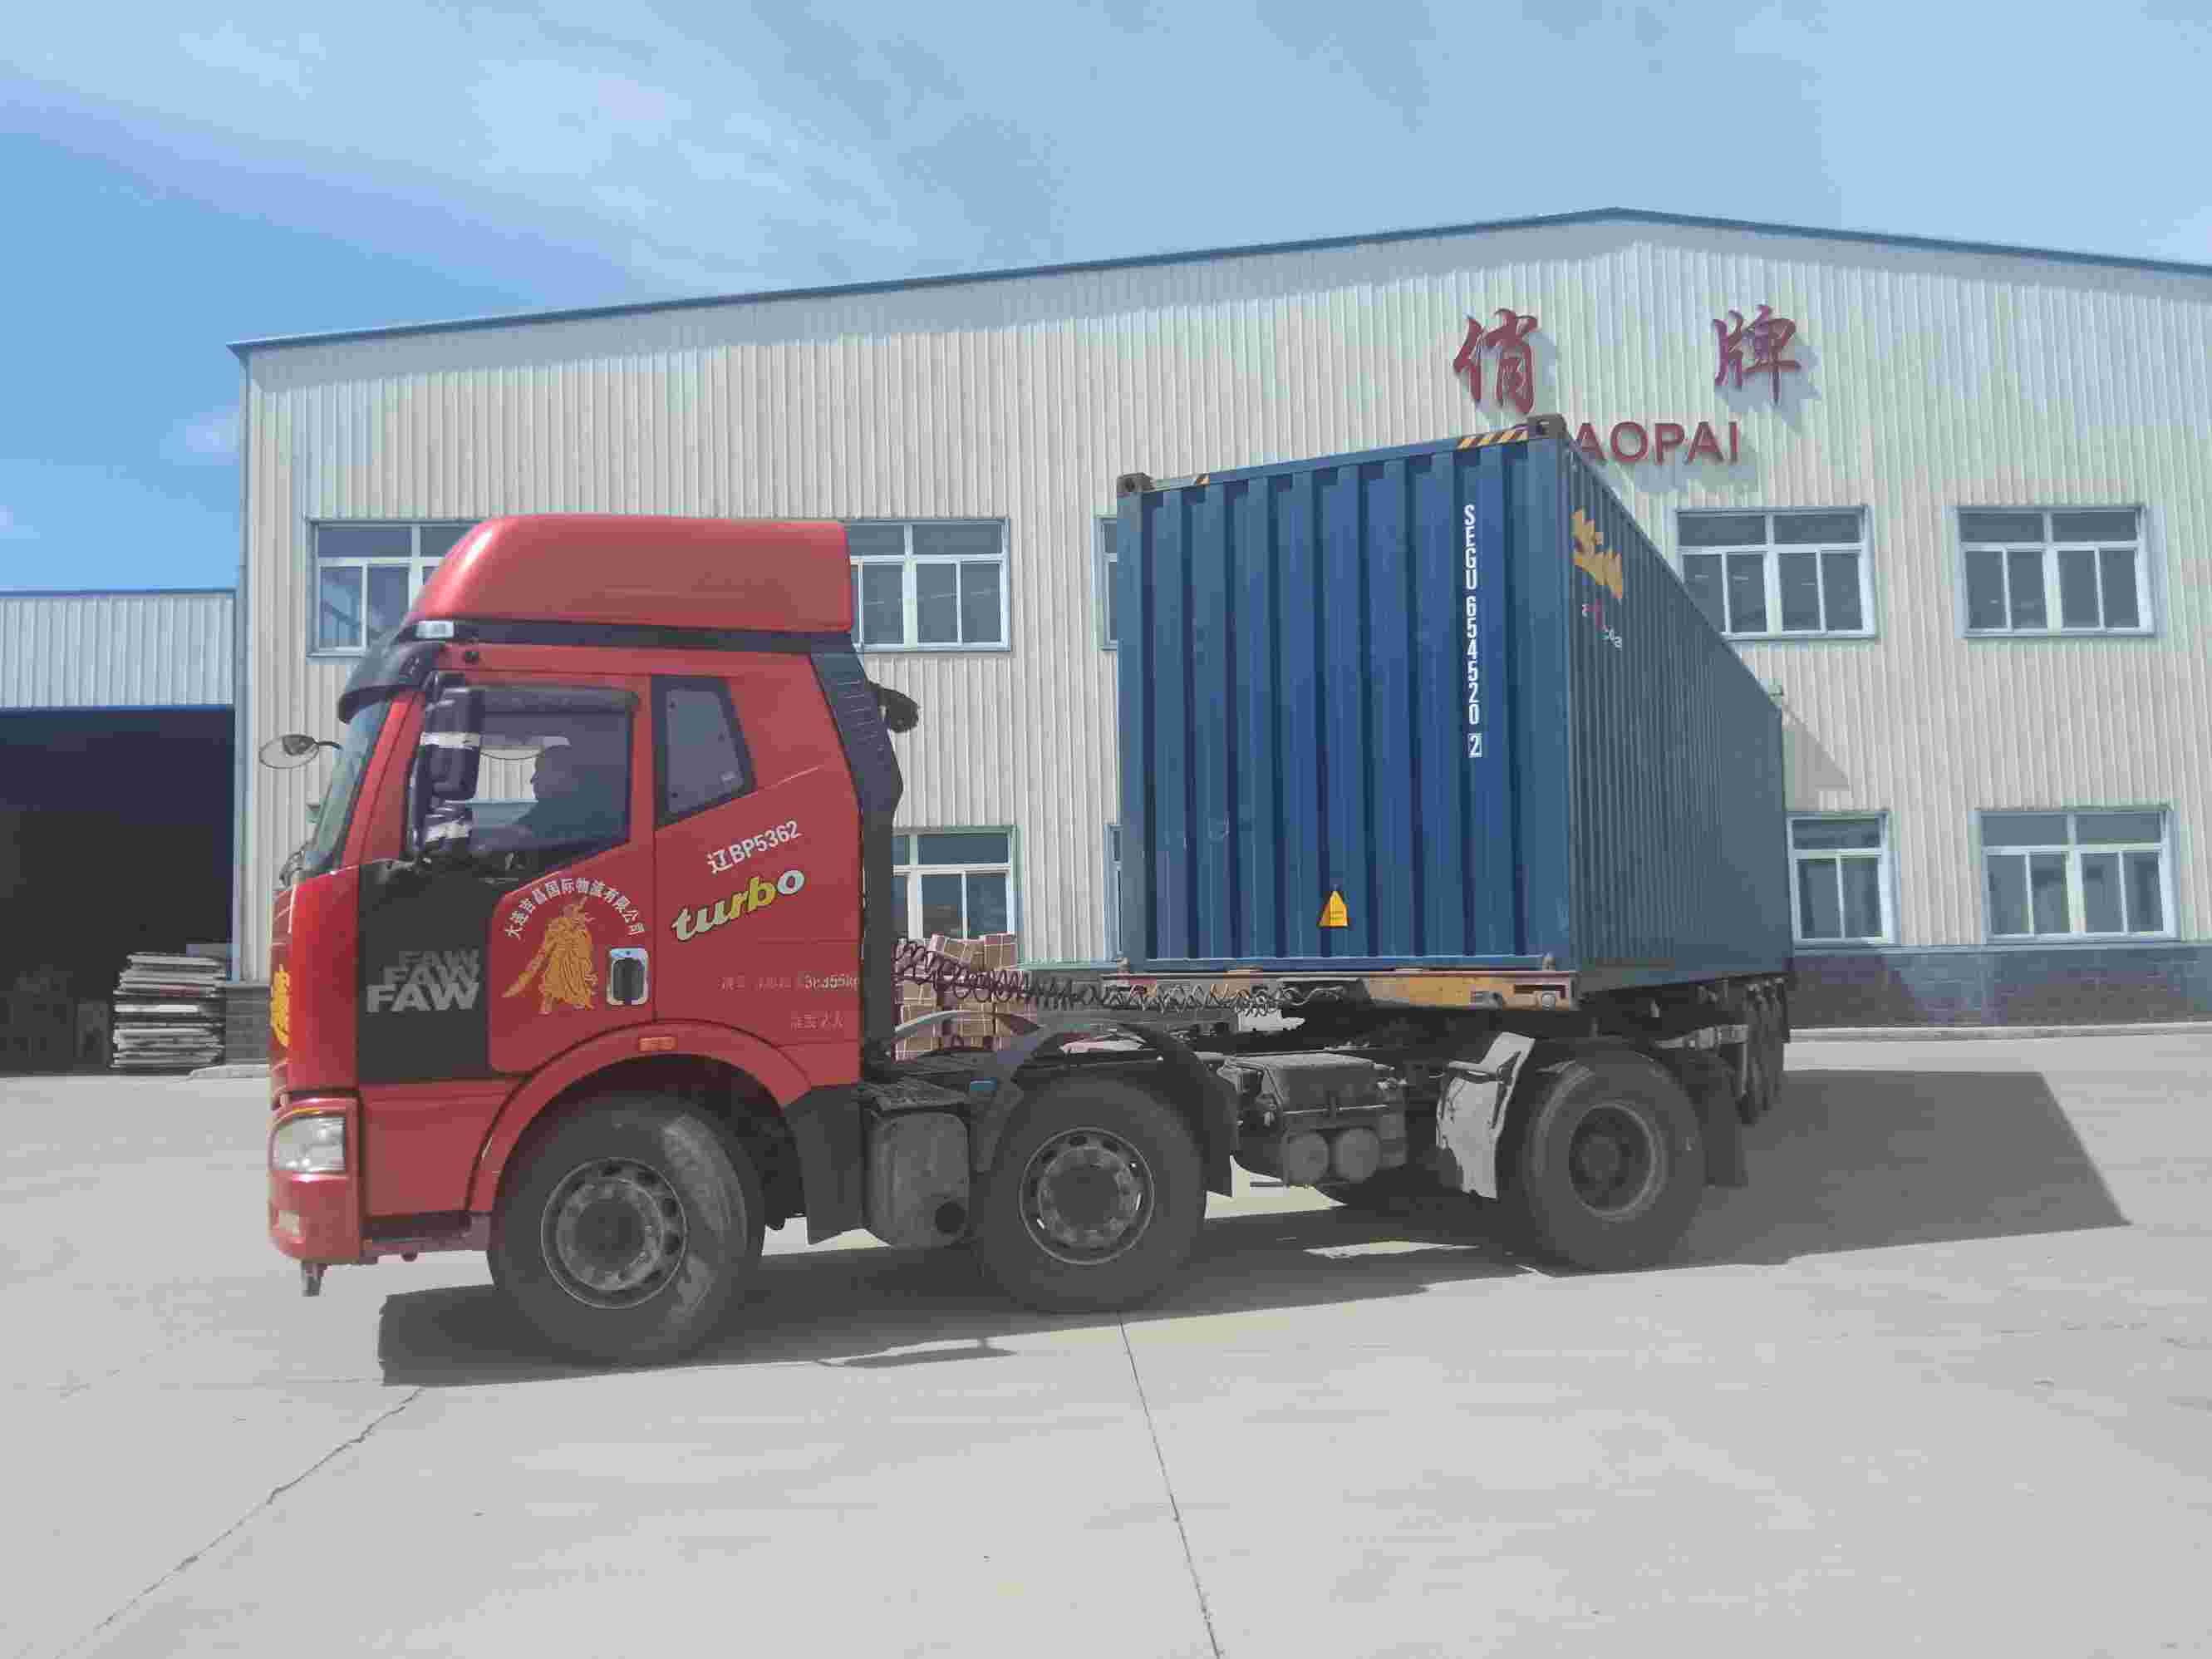  Liaoning Qiaopai Machineries Co., Ltd. exports sunflower seed dehulling equipment TFKH-1500 to Russia